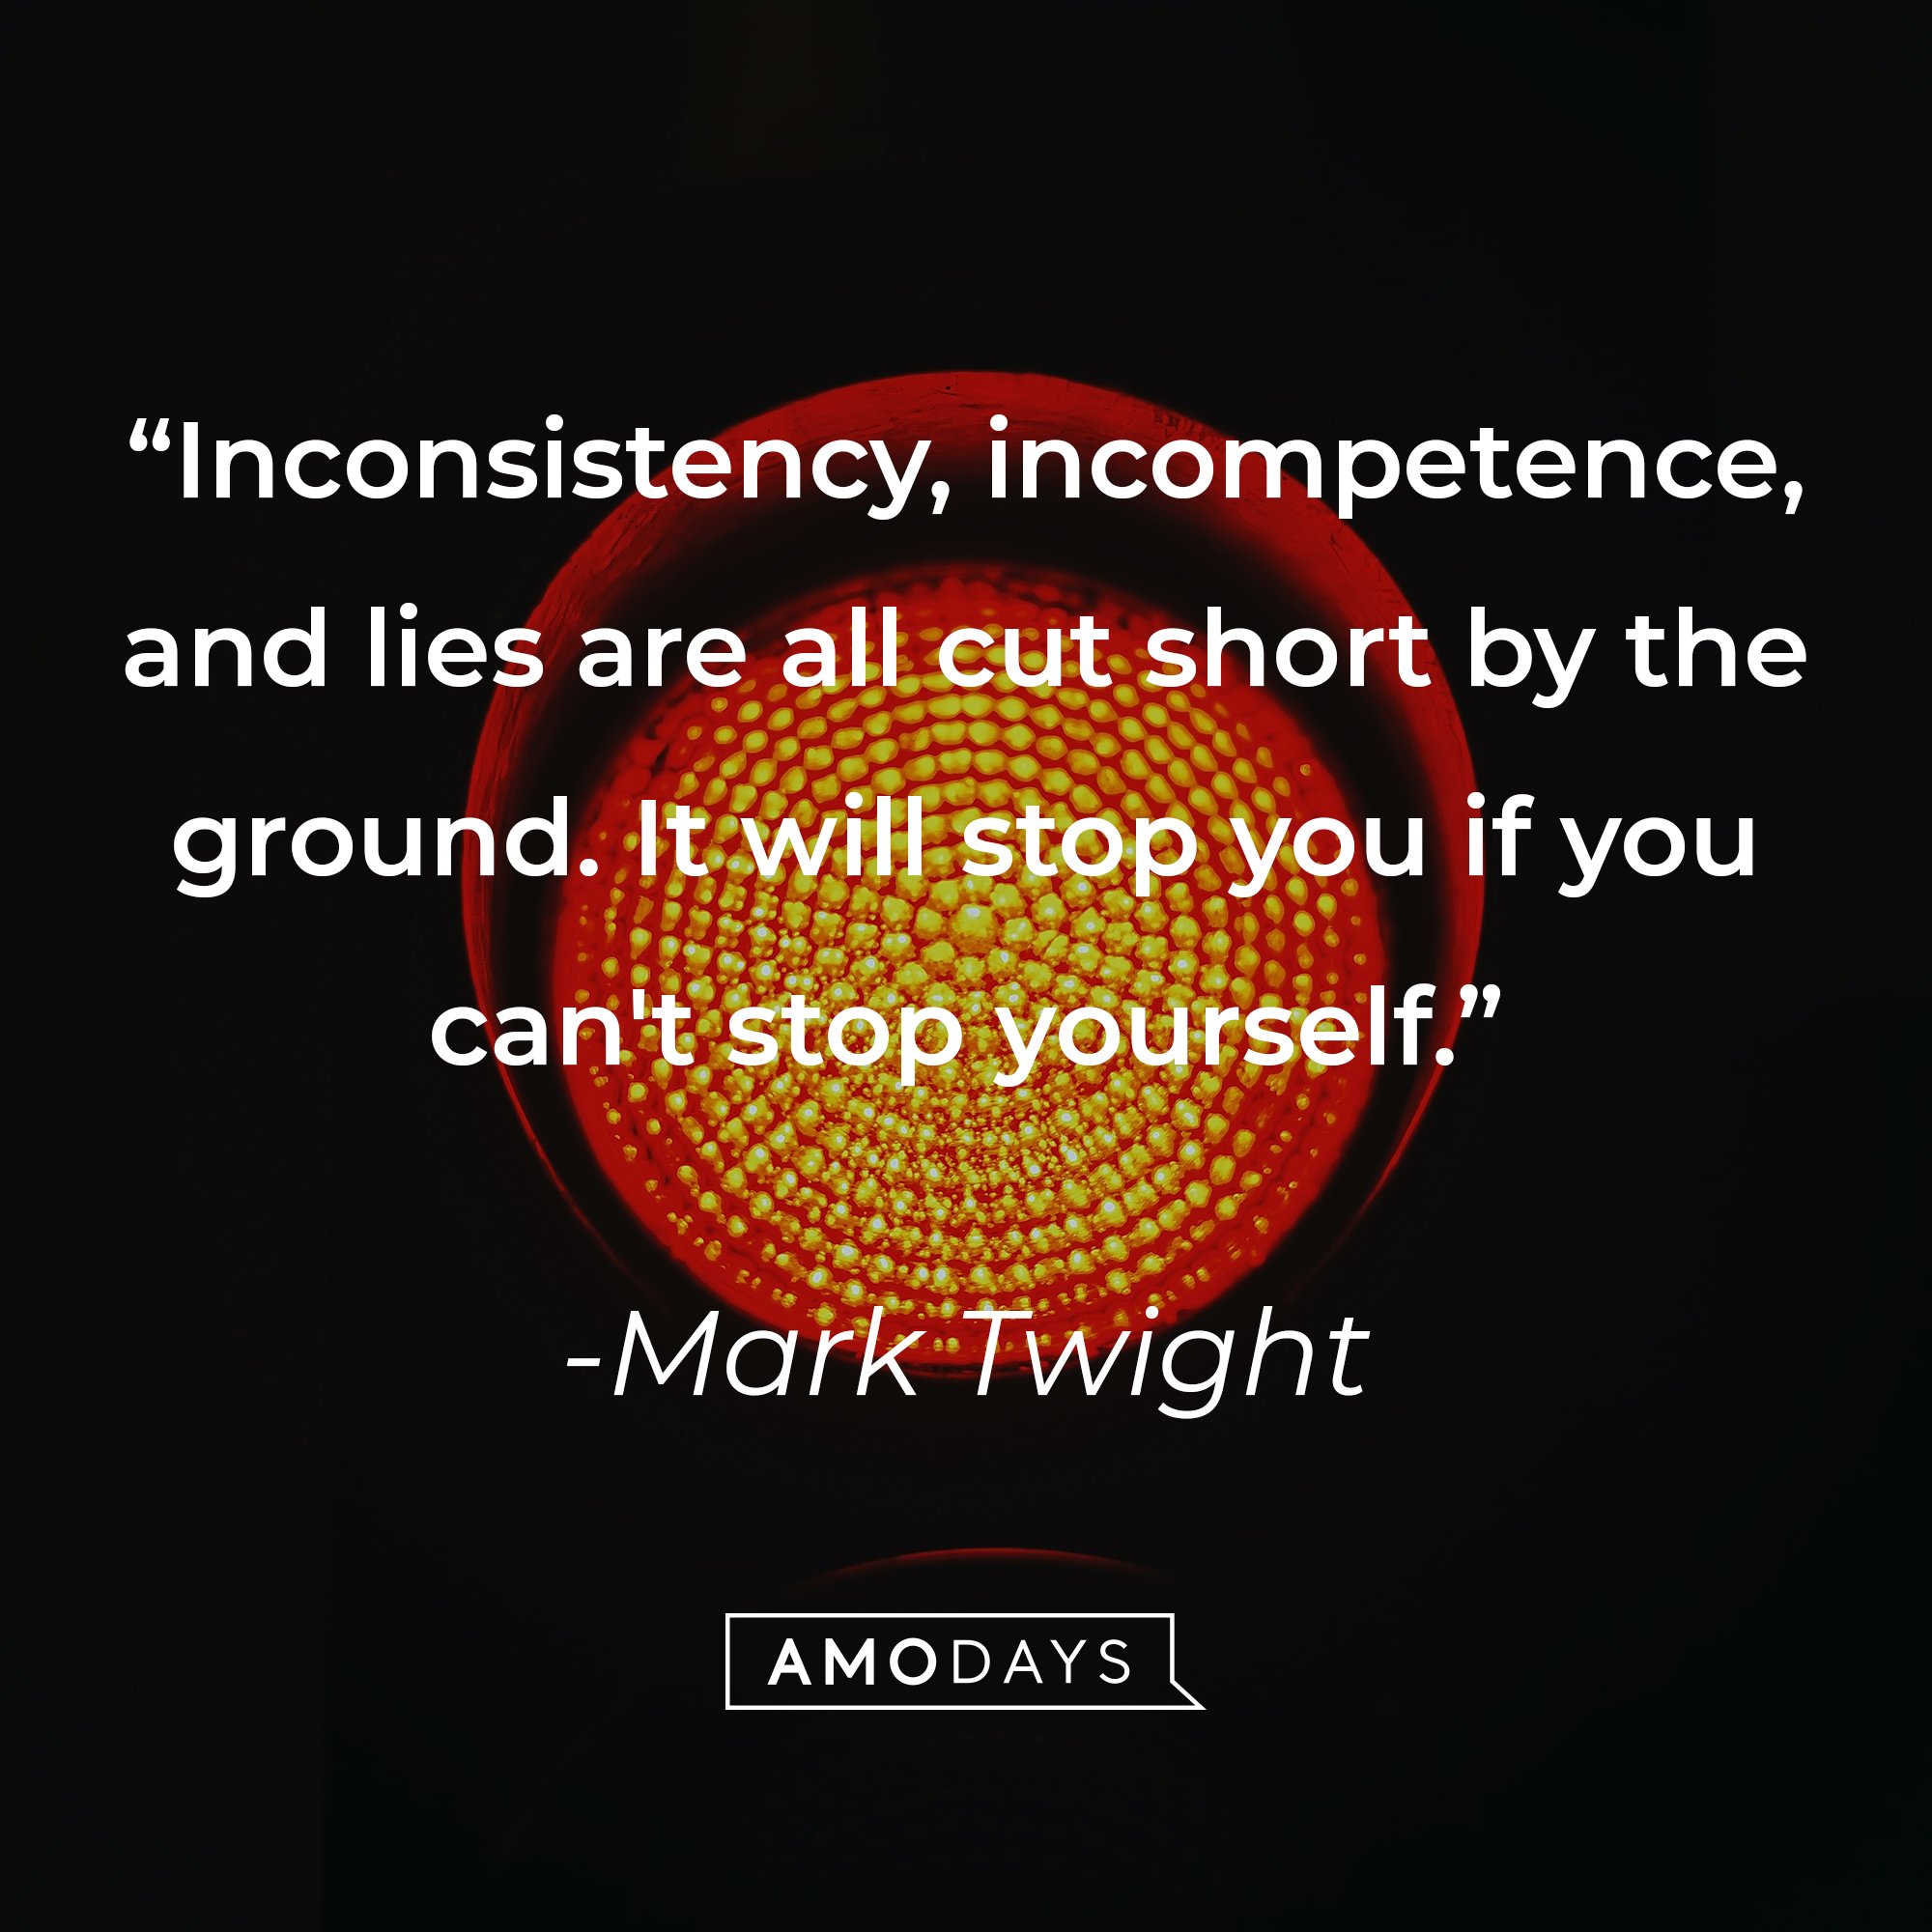 Mark Twight's quote: "Inconsistency, incompetence, and lies are all cut short by the ground. It will stop you if you can't stop yourself." | Image: AmoDays